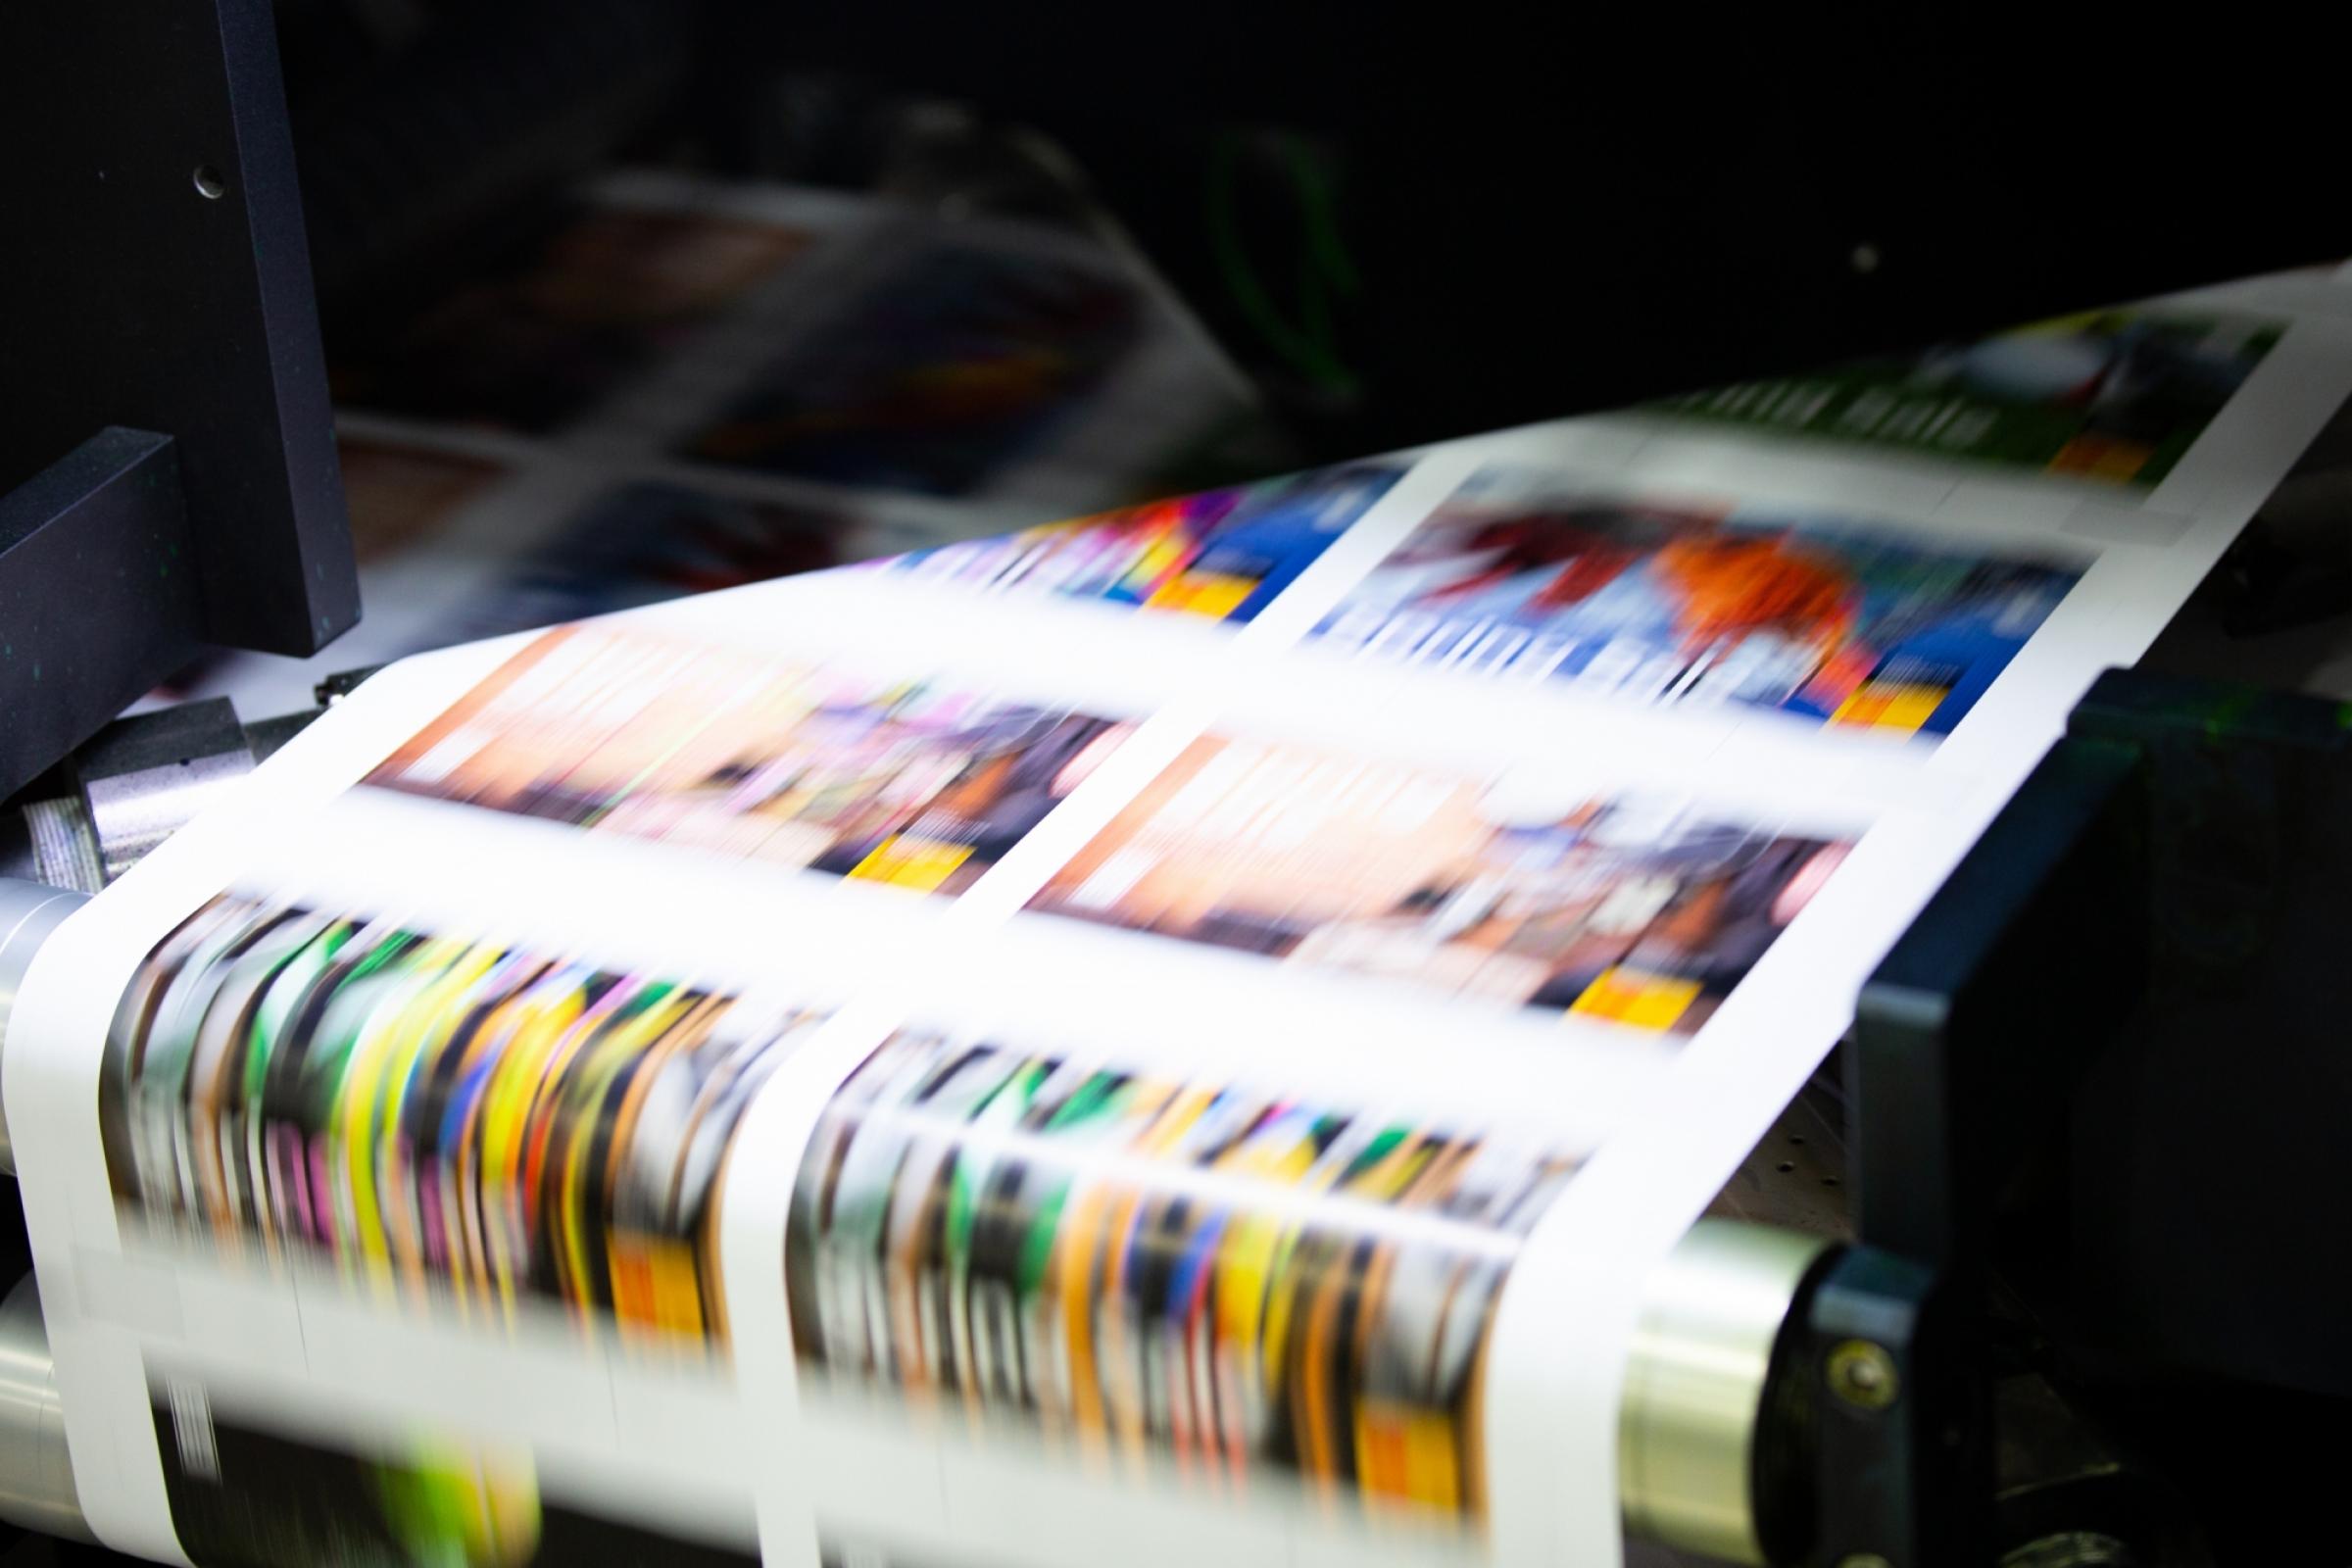 On-trend: Inkjet printing is perfect for meeting contemporary needs of shorter print runs